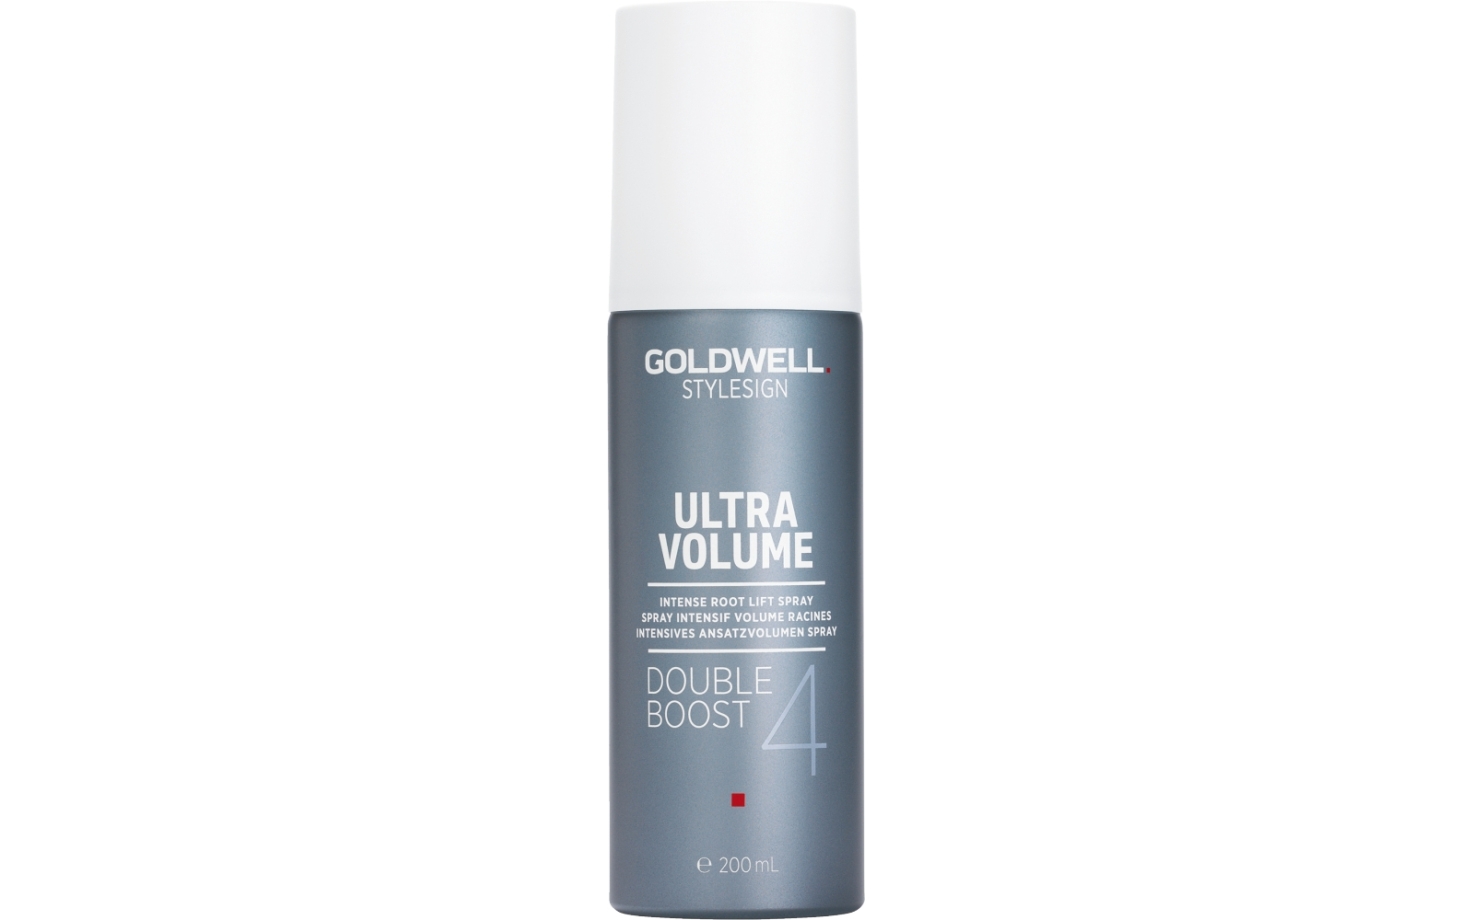 Sign Ultra Volume Double Boost